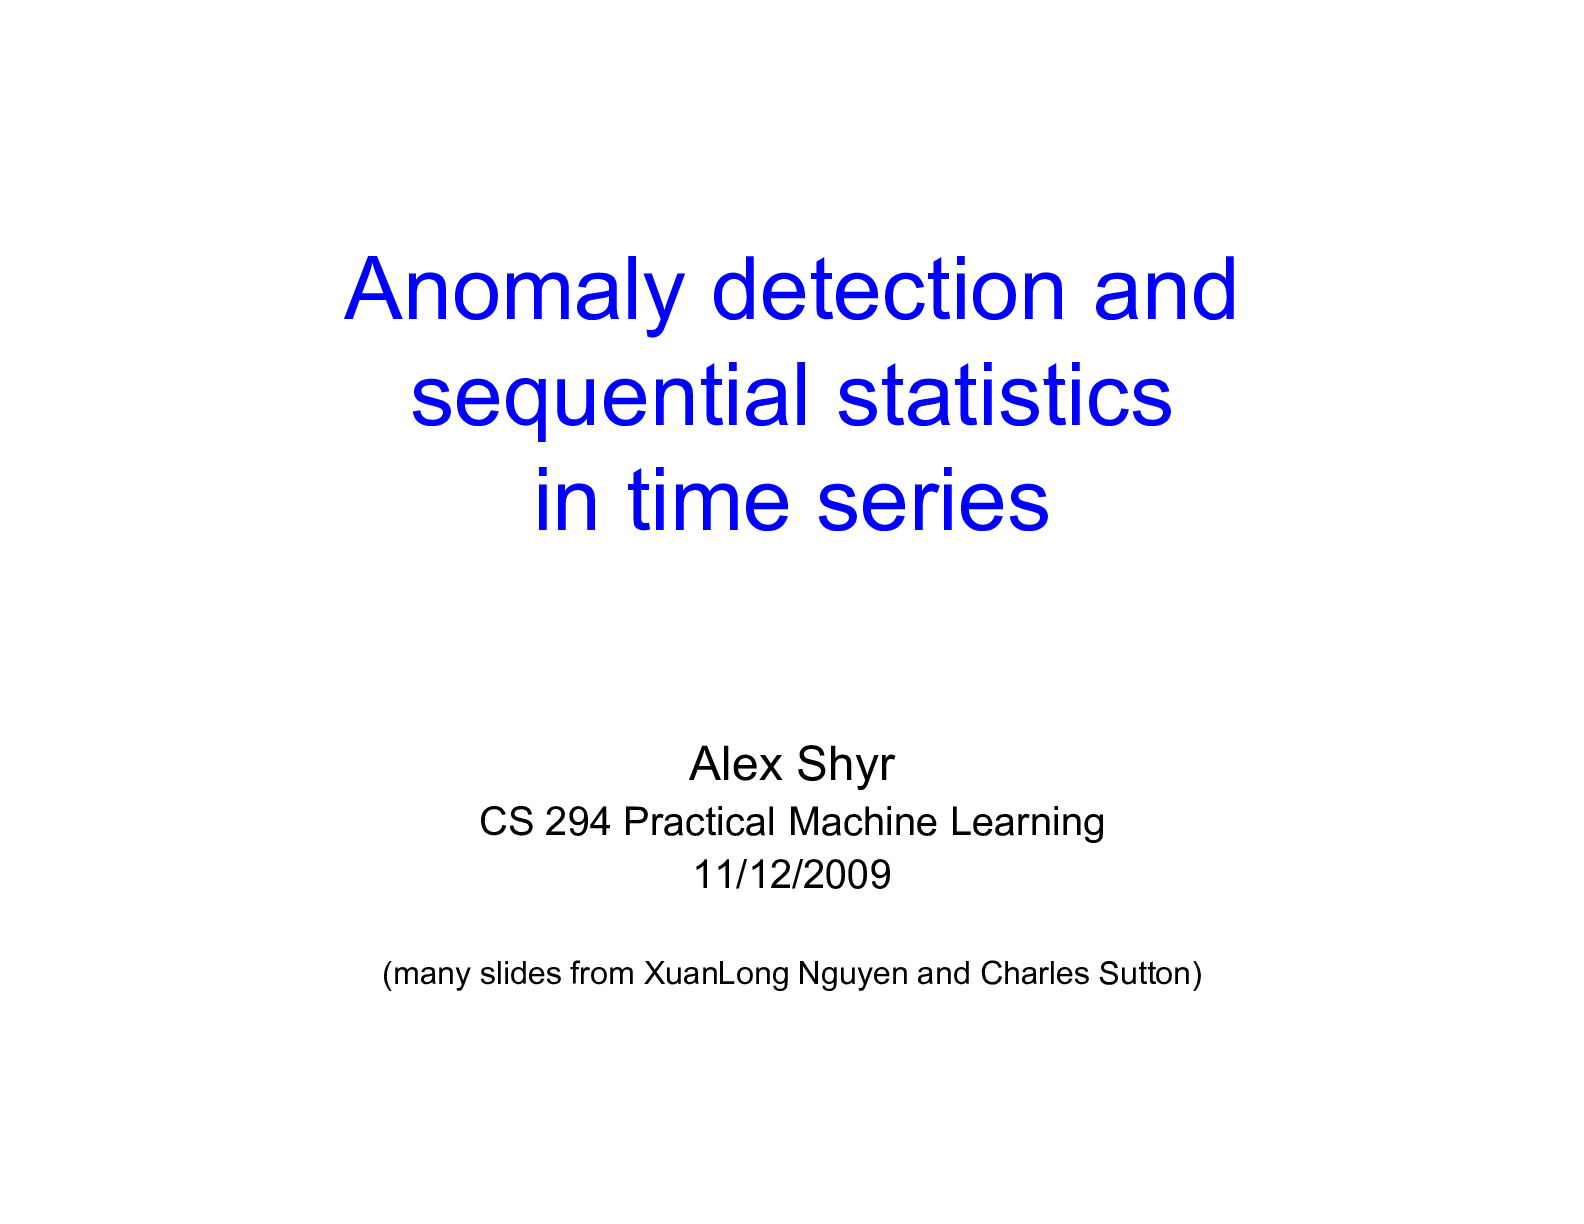 12[Nov 12]Time series&sequential hypothesis testing&anomaly detection[Alex Shyr]